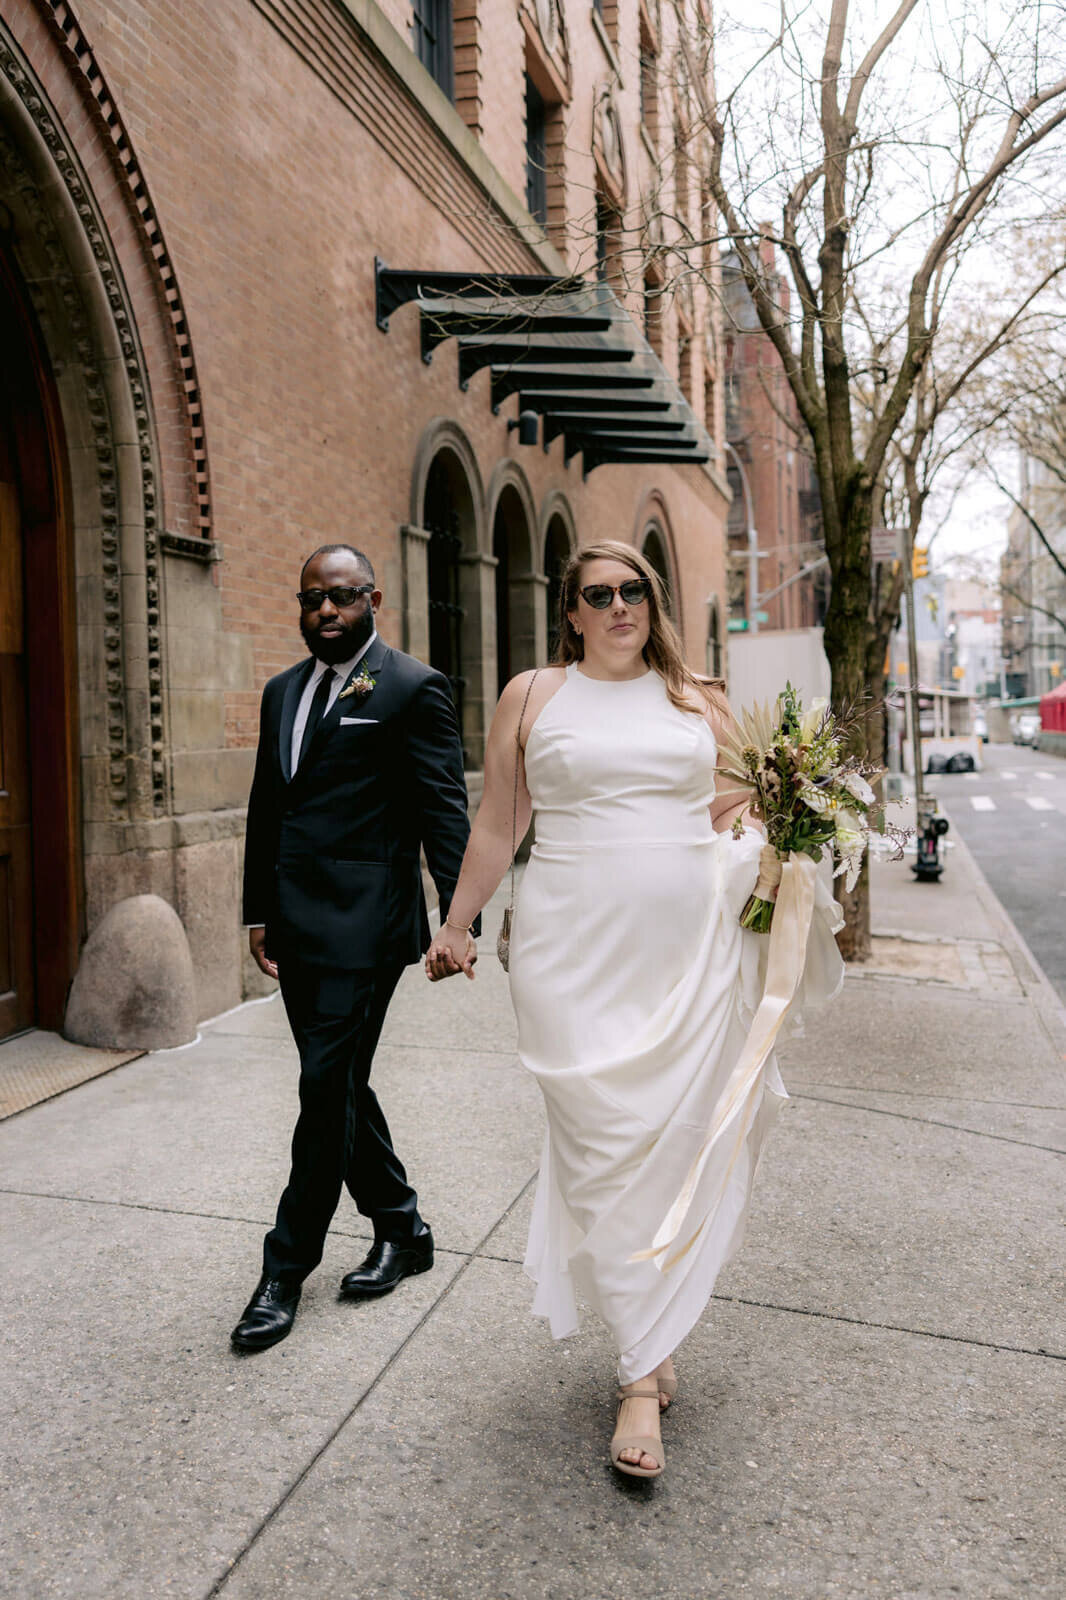 The bride and the groom are walking in the streets of New York City.